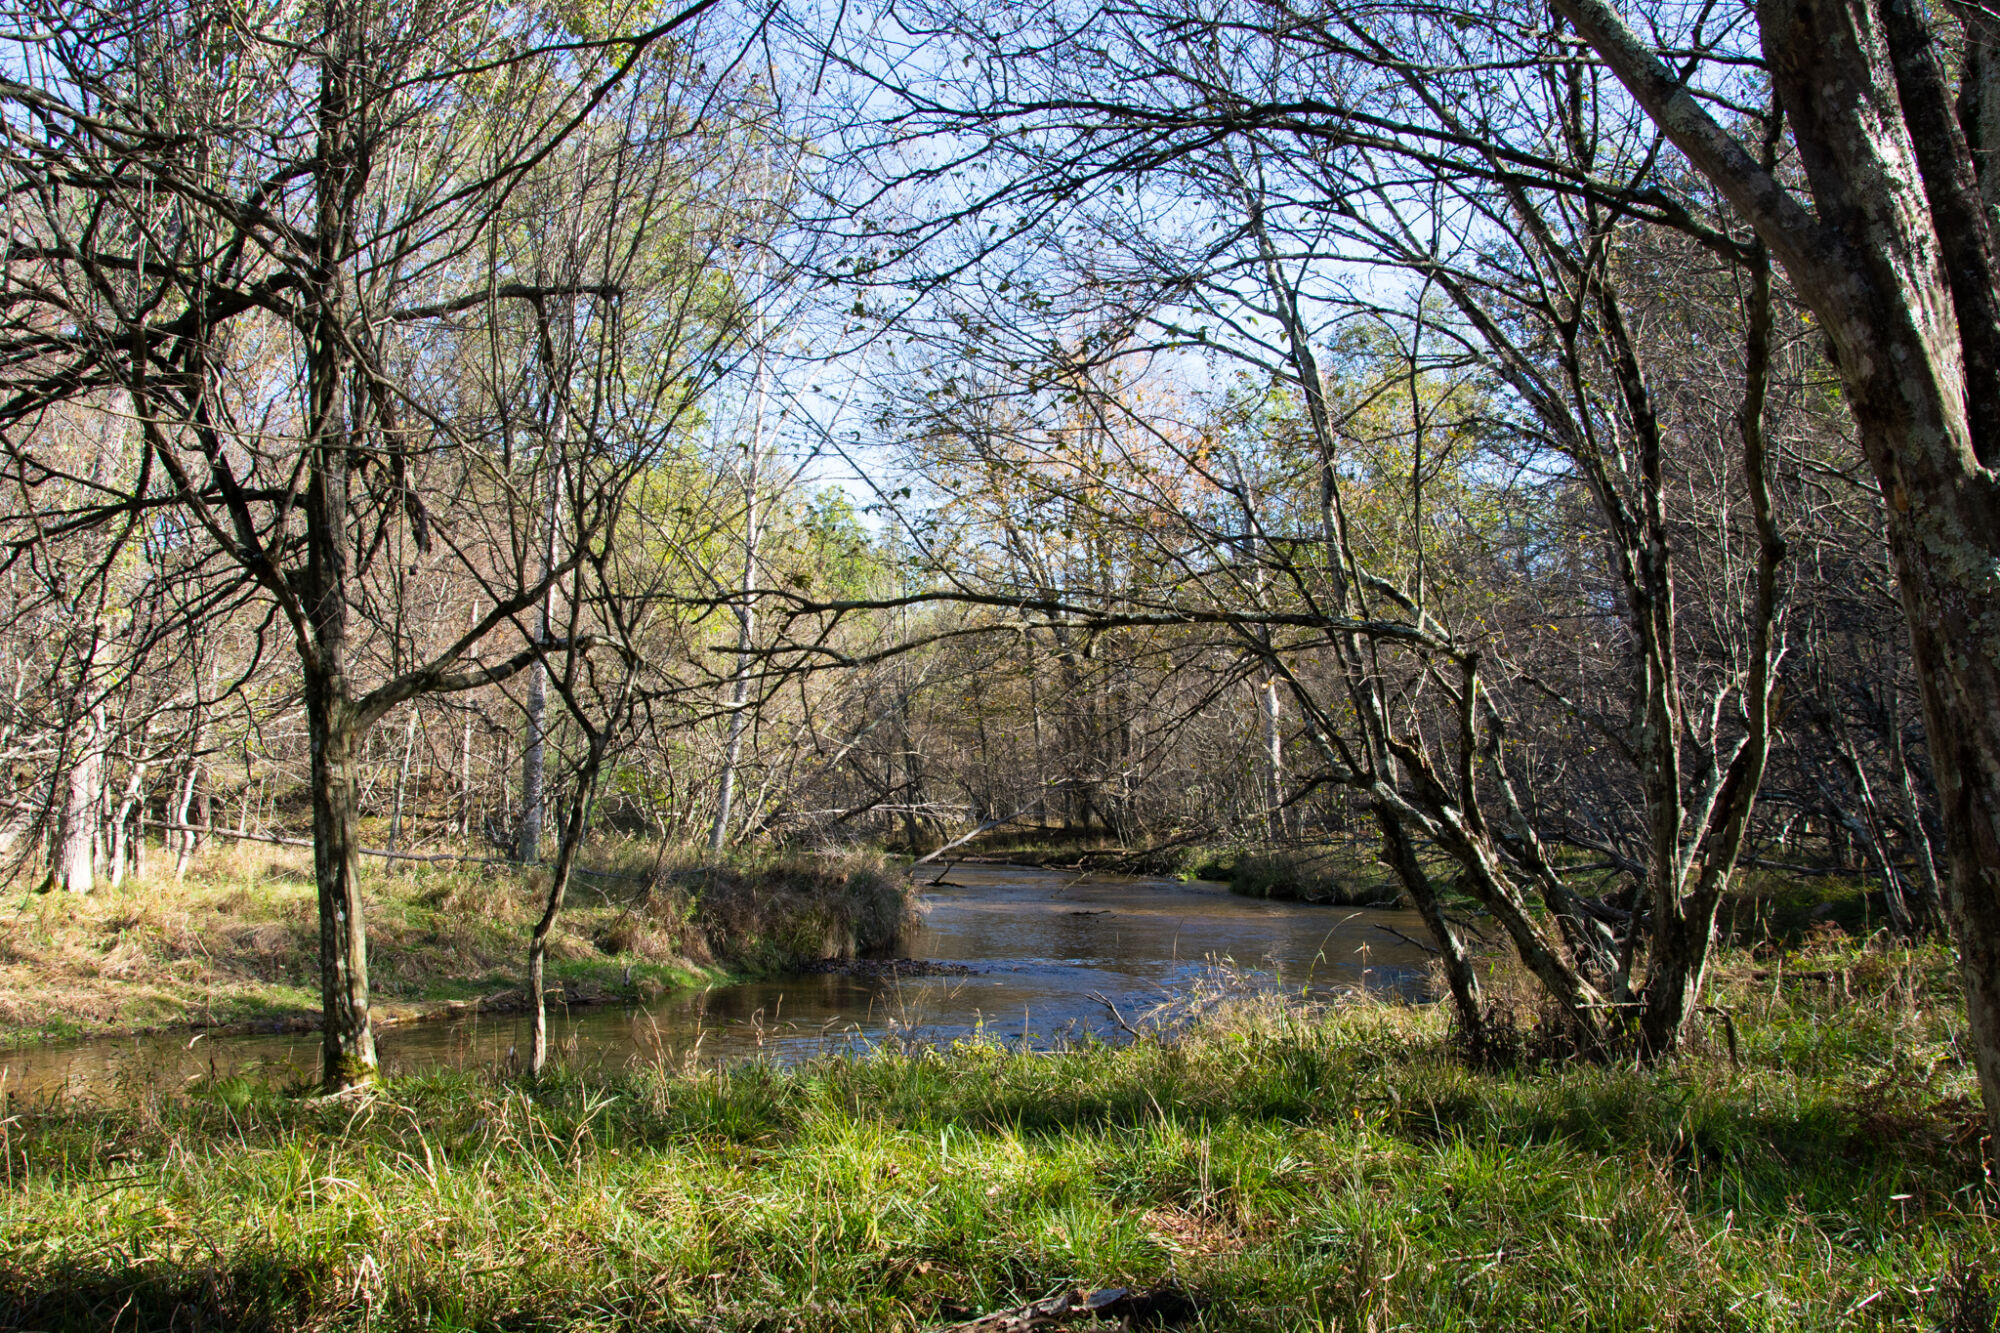 Autumn view of the Little South Branch of the Pere Marquette River